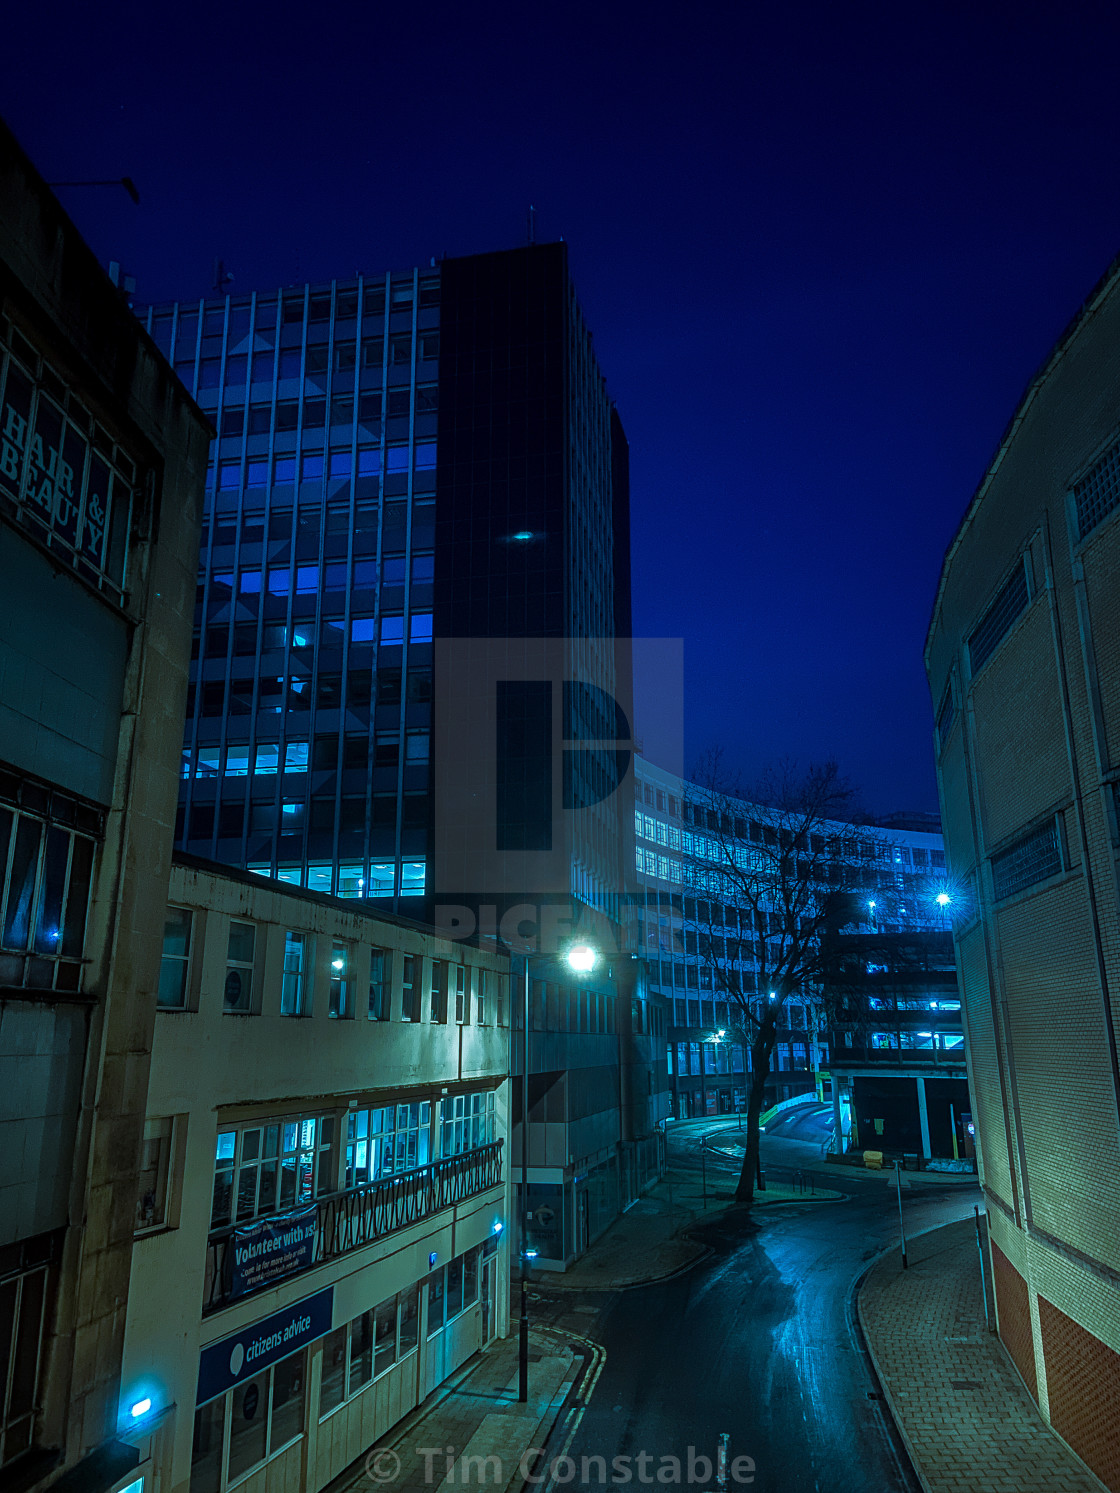 "Night time in the city" stock image